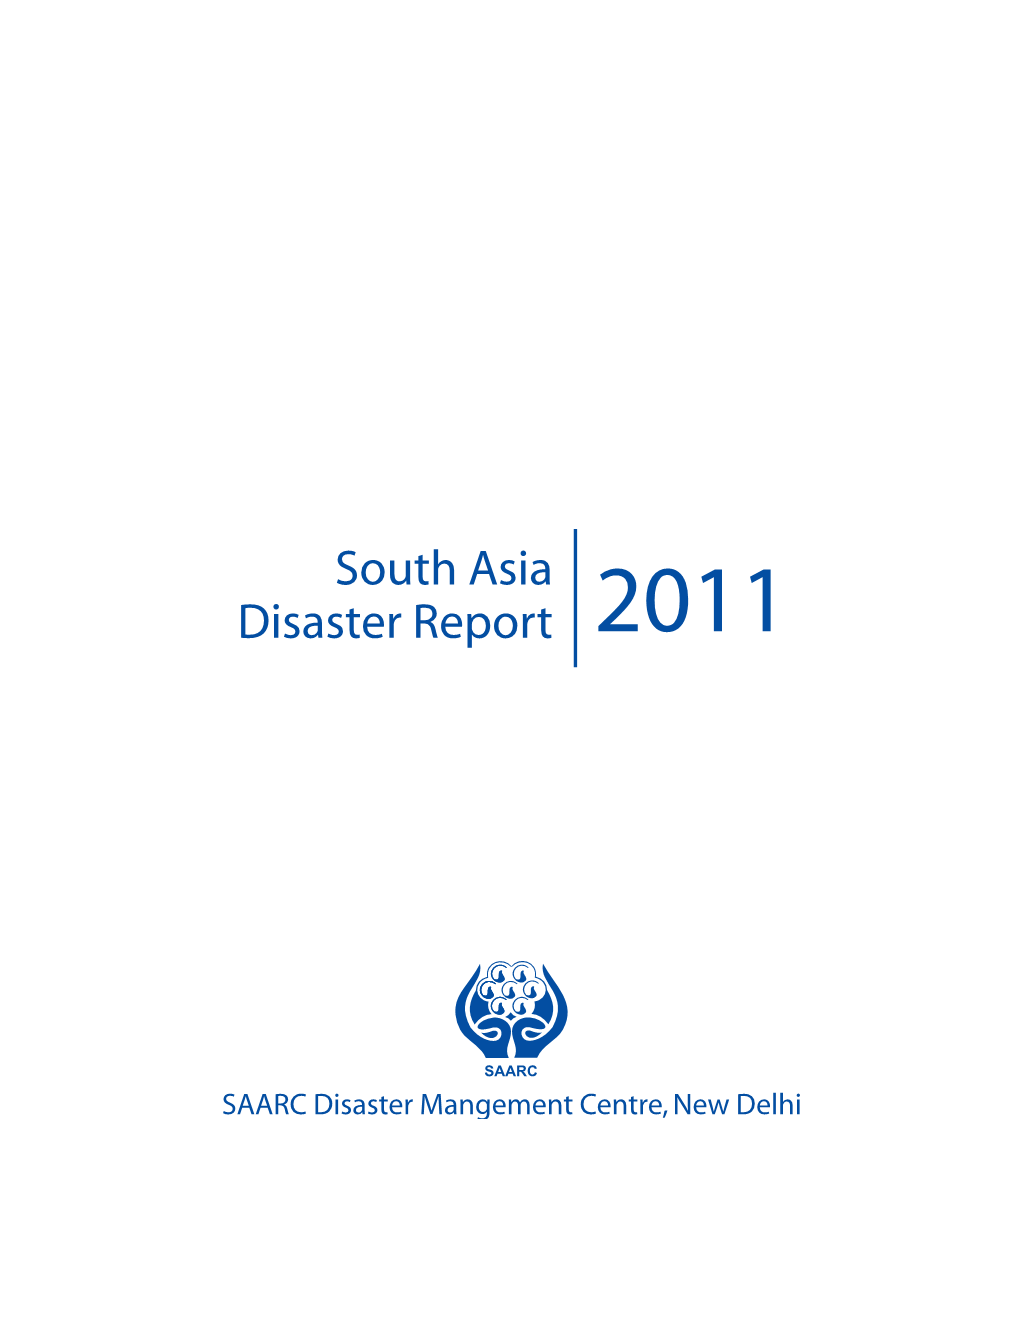 South Asia Disaster Management Report 2011